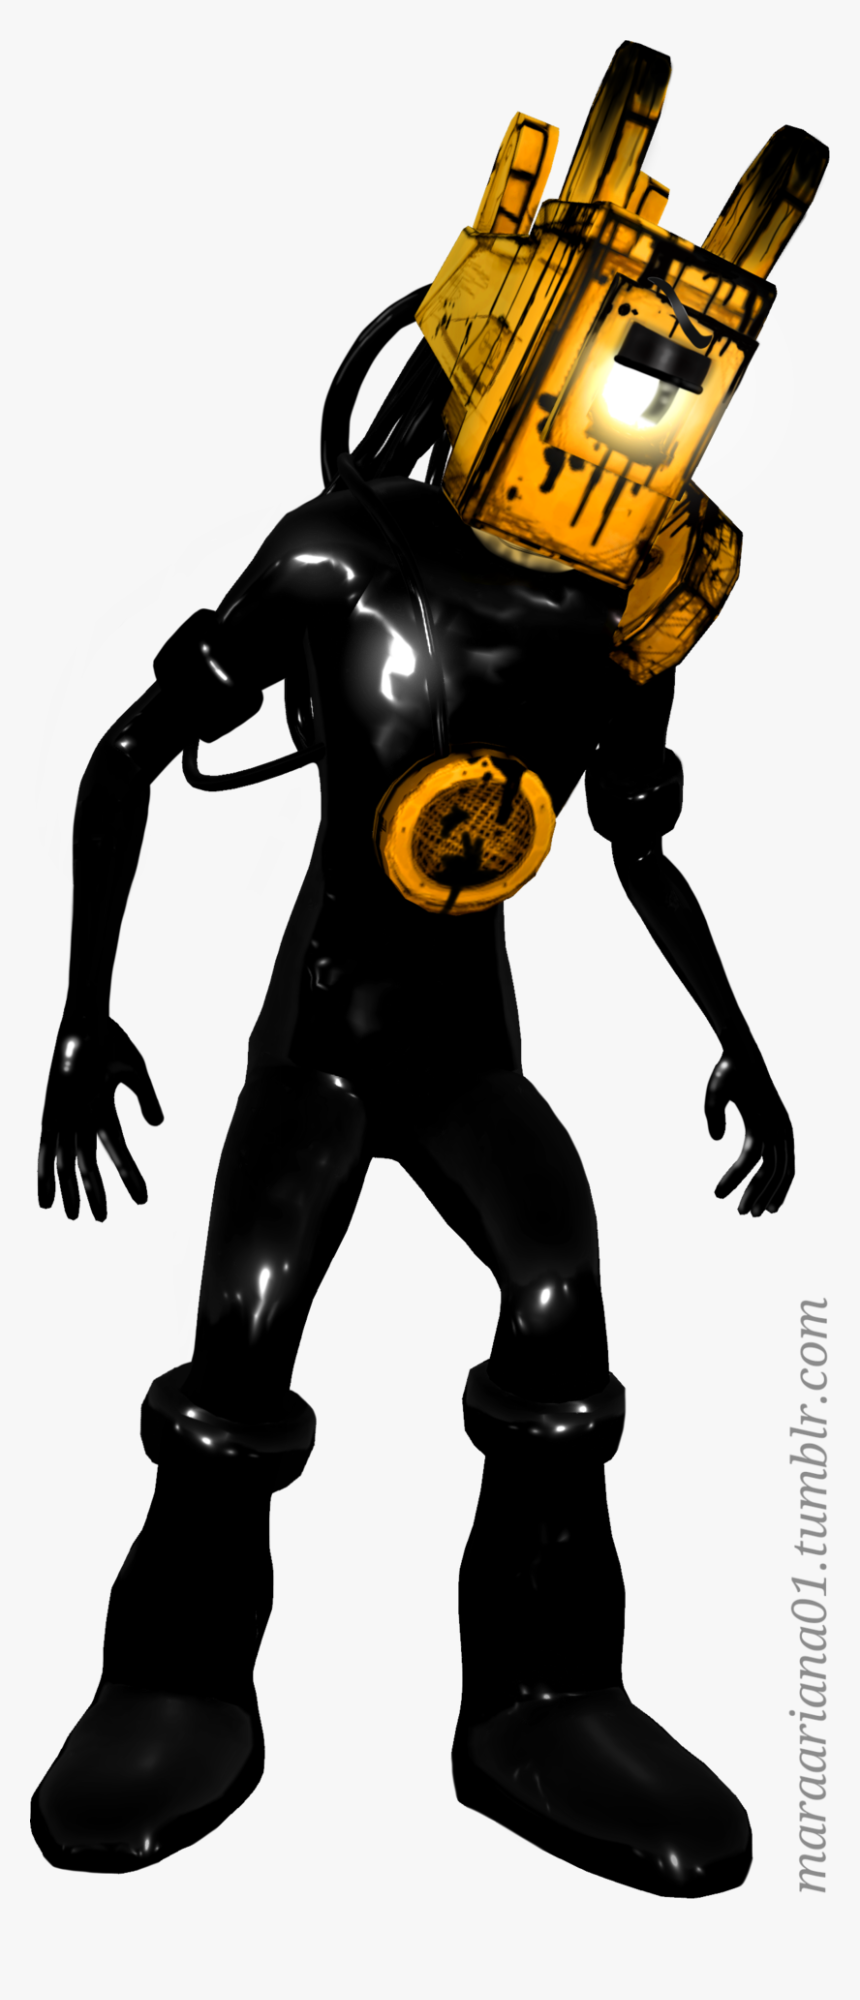 Image - Bendy And The Ink Machine Projectionist, HD Png Download, Free Download